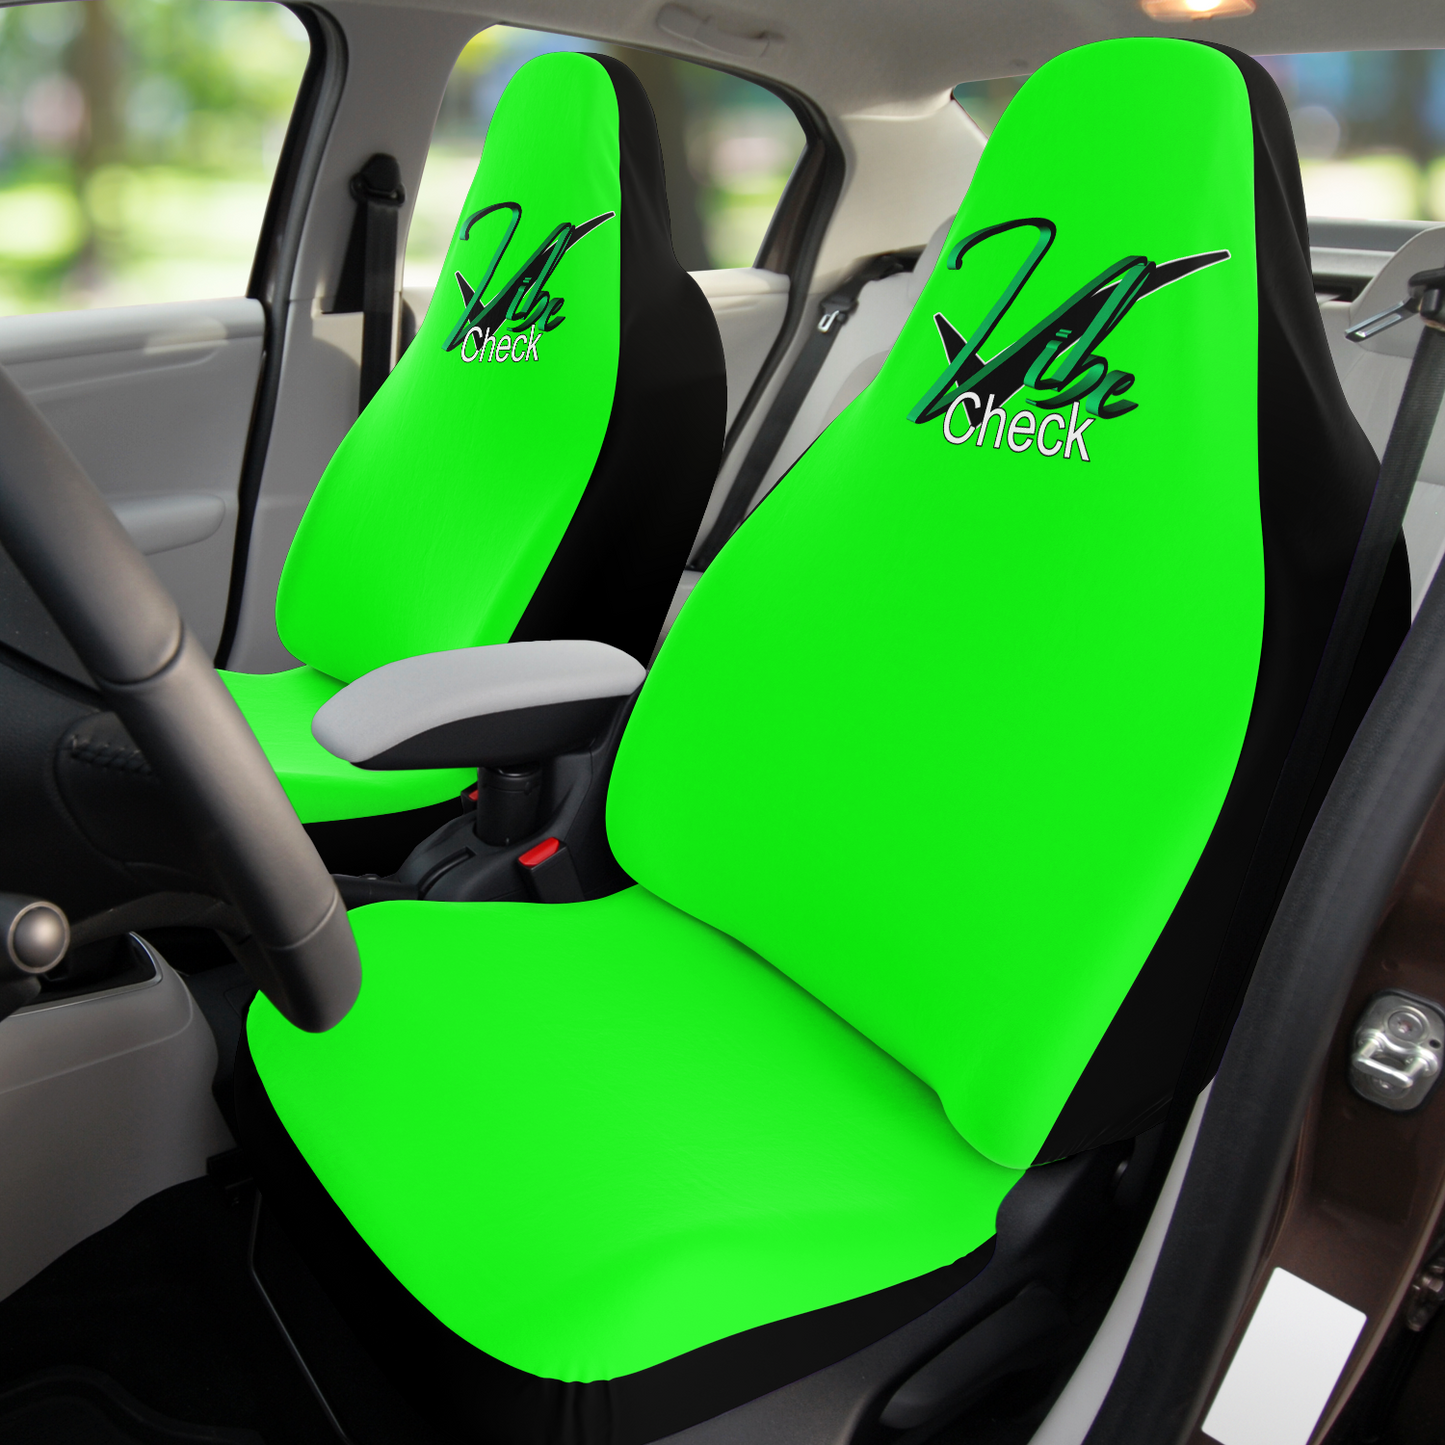 Vibe Check - Green and Black Outlined Green - Lime Green Background